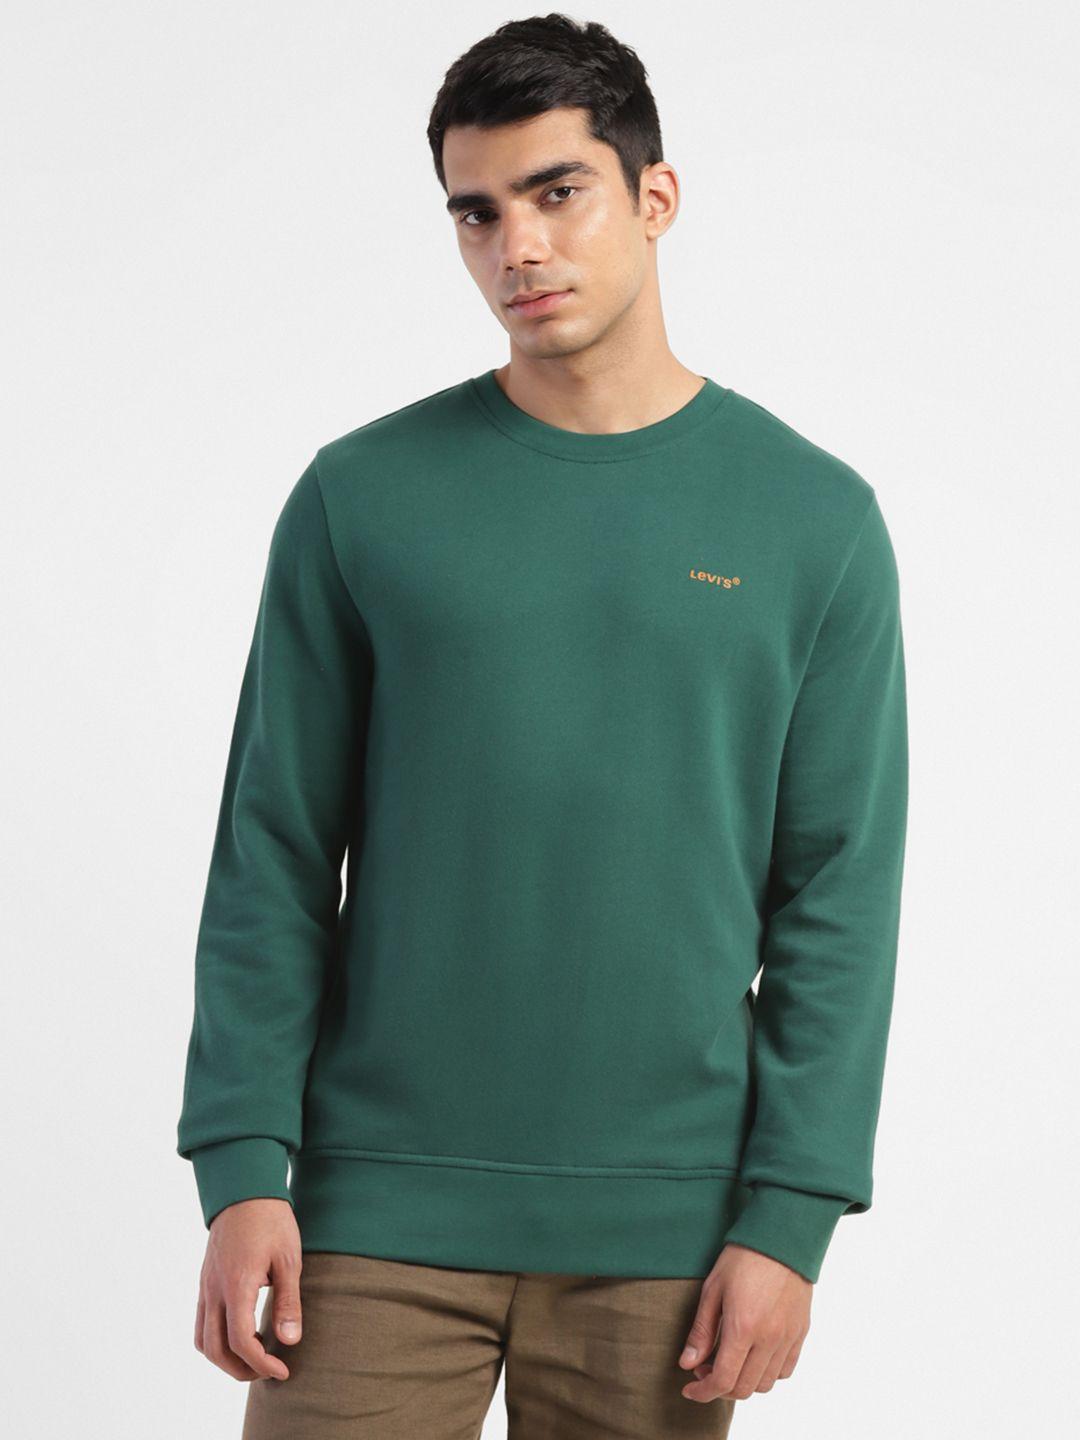 levis solid round neck knitted pure cotton sweatshirt with minimal brand logo print detail